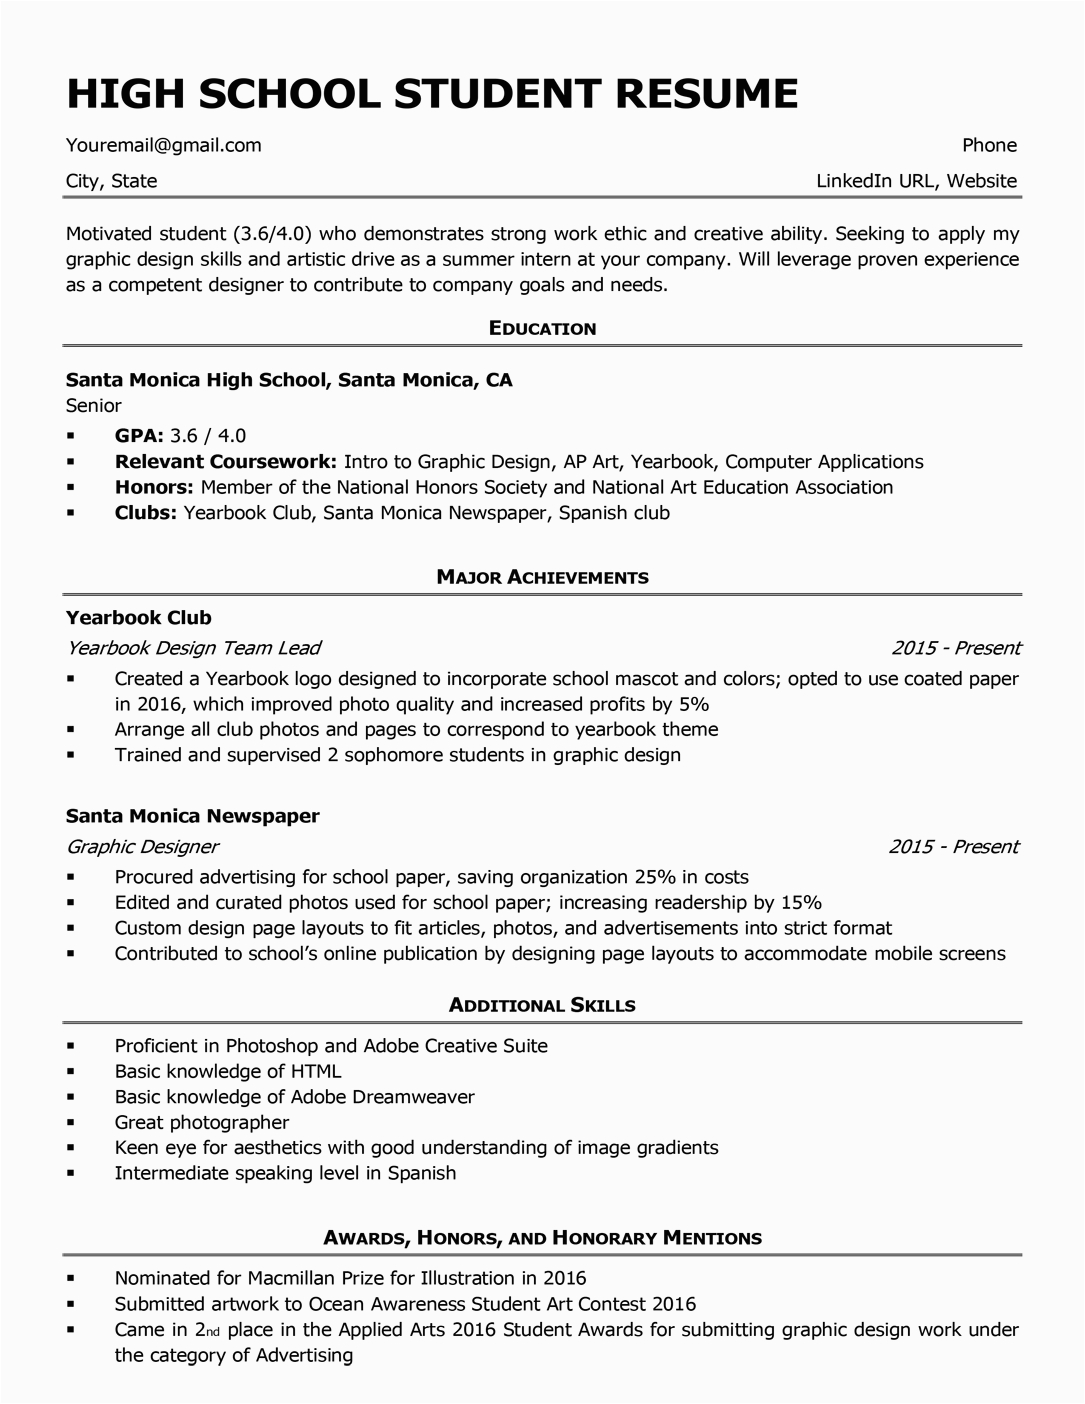 Free Resume Samples for Highschool Students High School Resume Template & Writing Tips